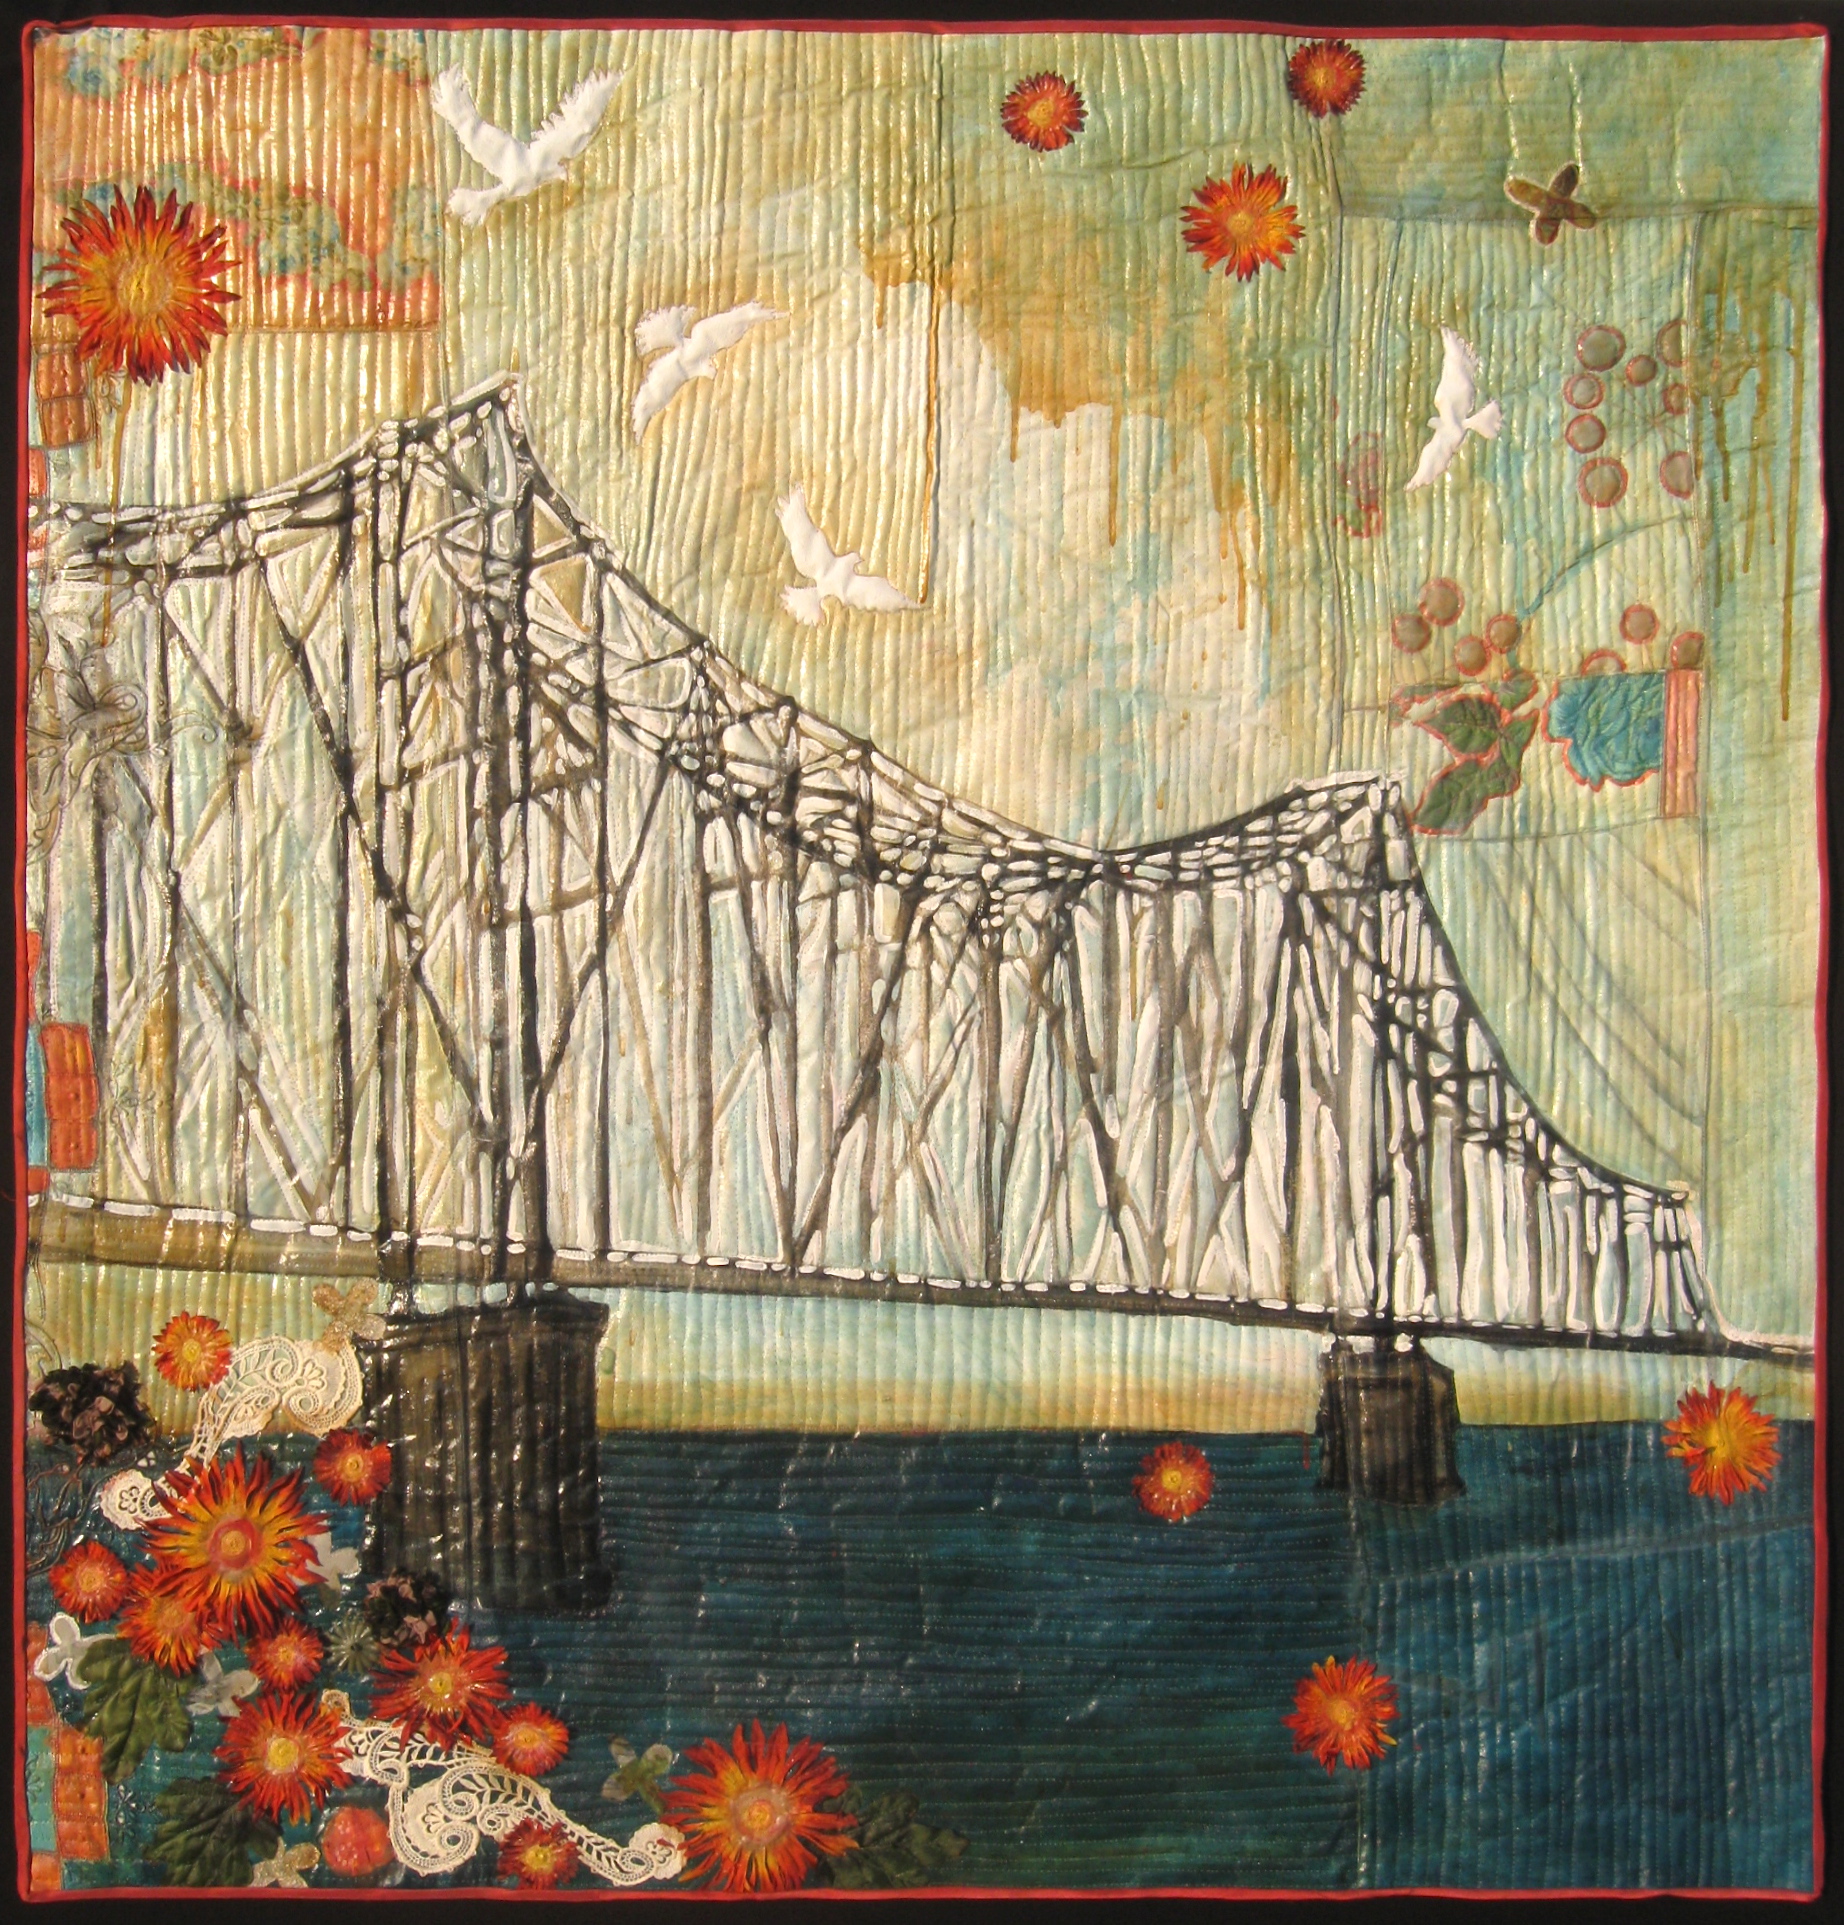 "Bridge with Birds," 46"h x 44"w, private collection